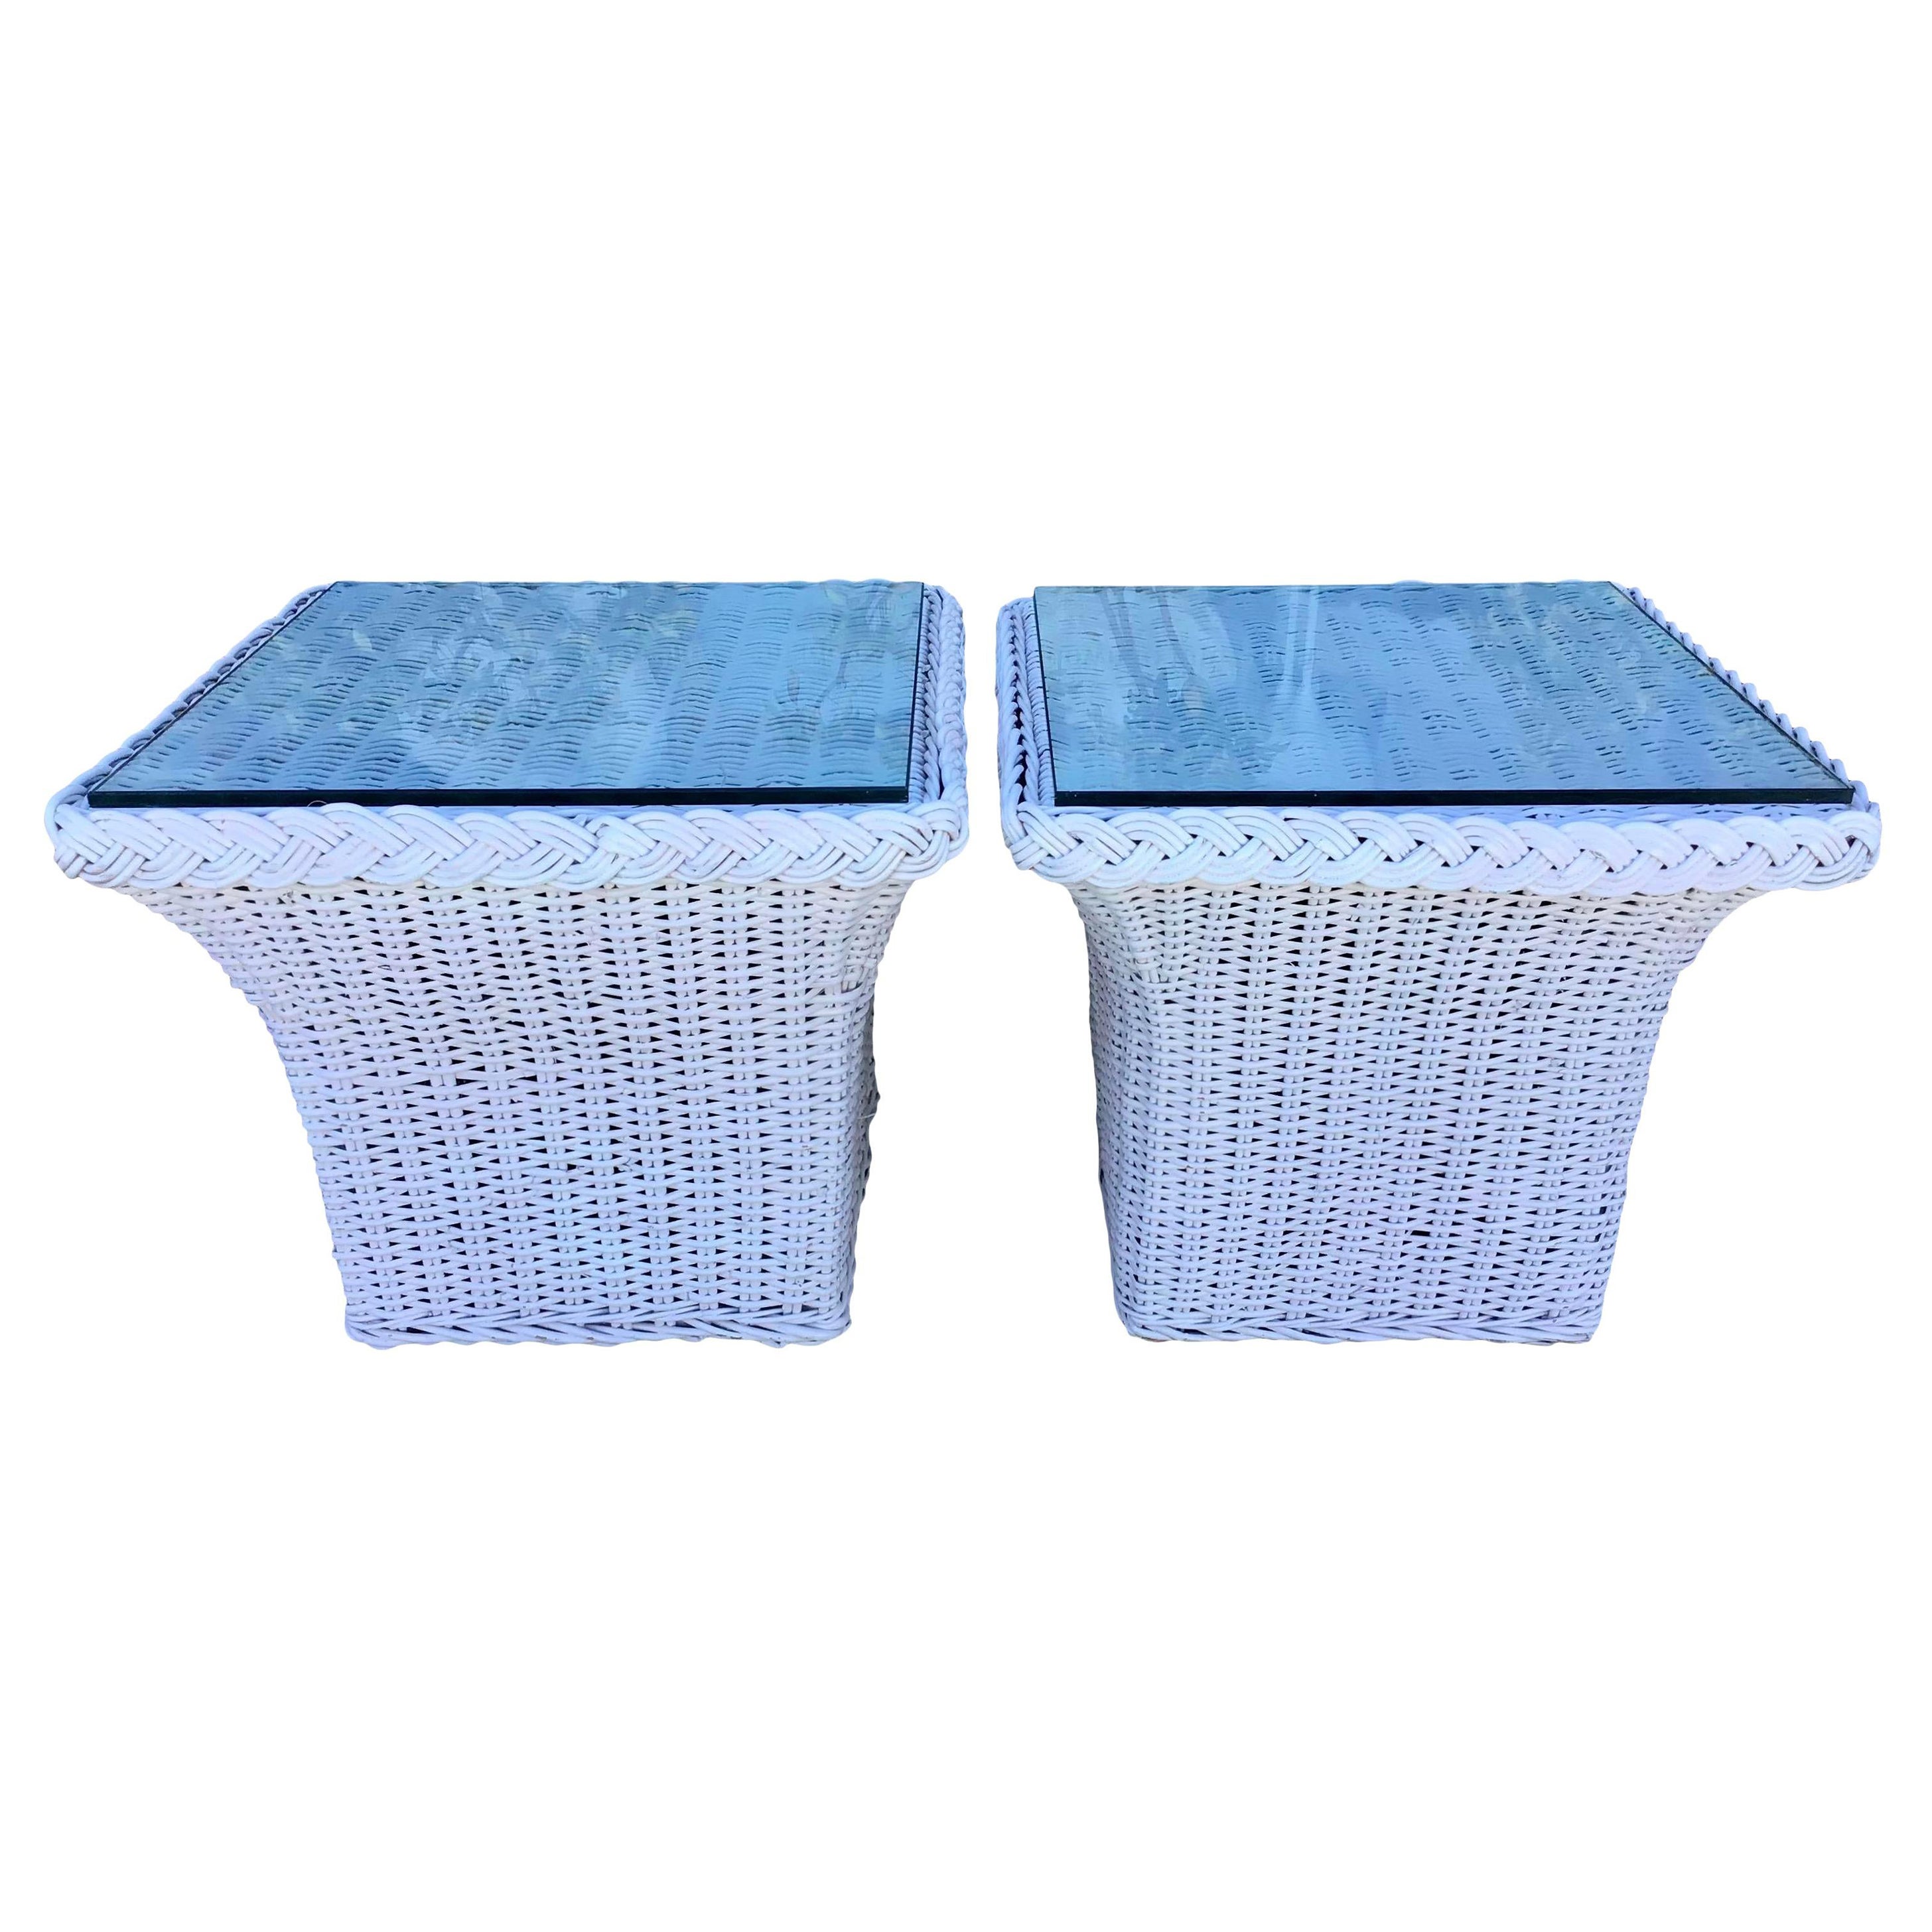 Bielecky Brothers White Square Rattan Side Tables, a Pair For Sale